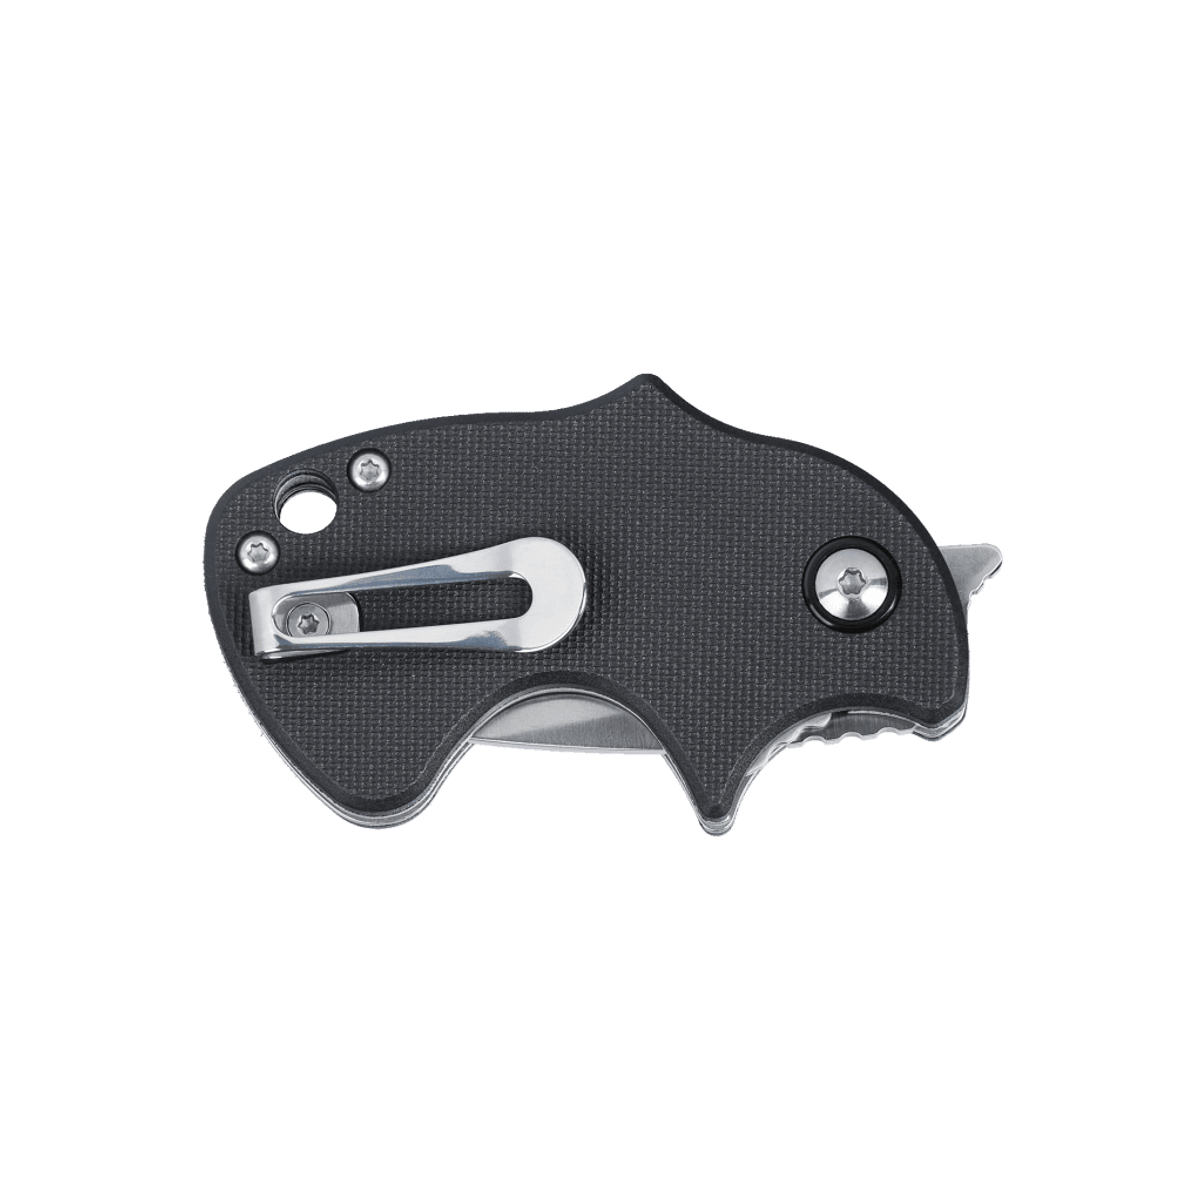 CRKT ORCA ASSISTED